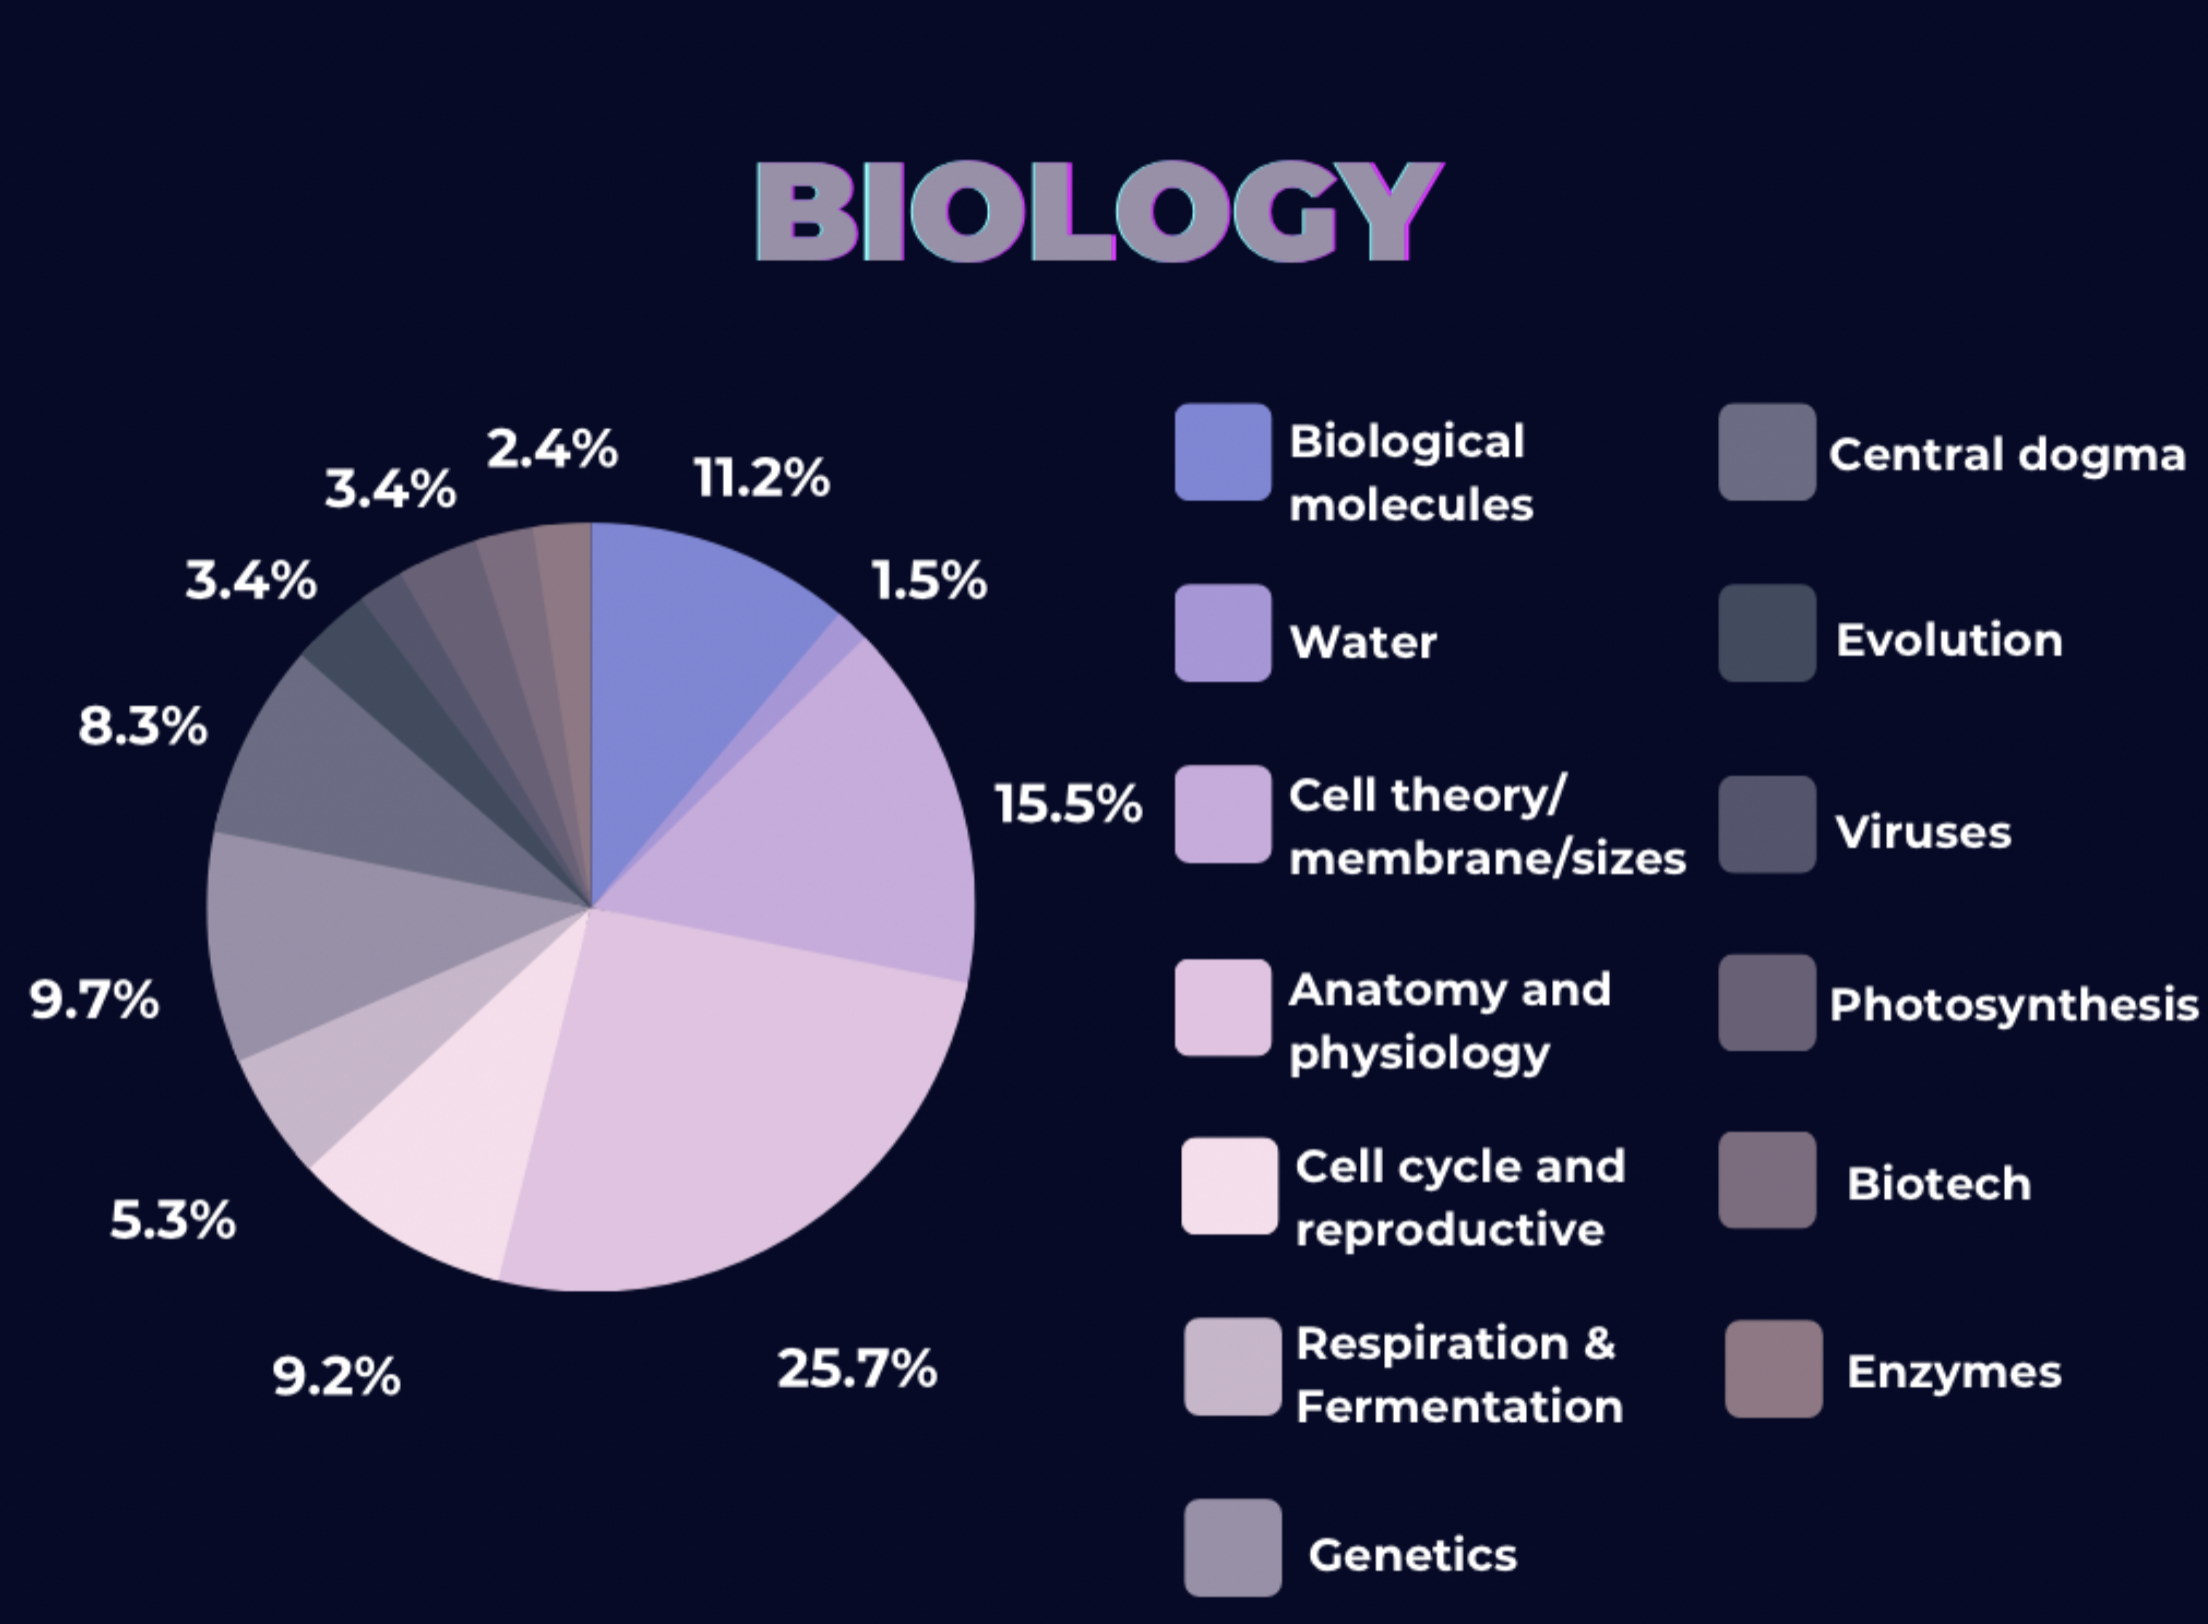 IMAT Biology section breakdown by topics 2011 to 2022